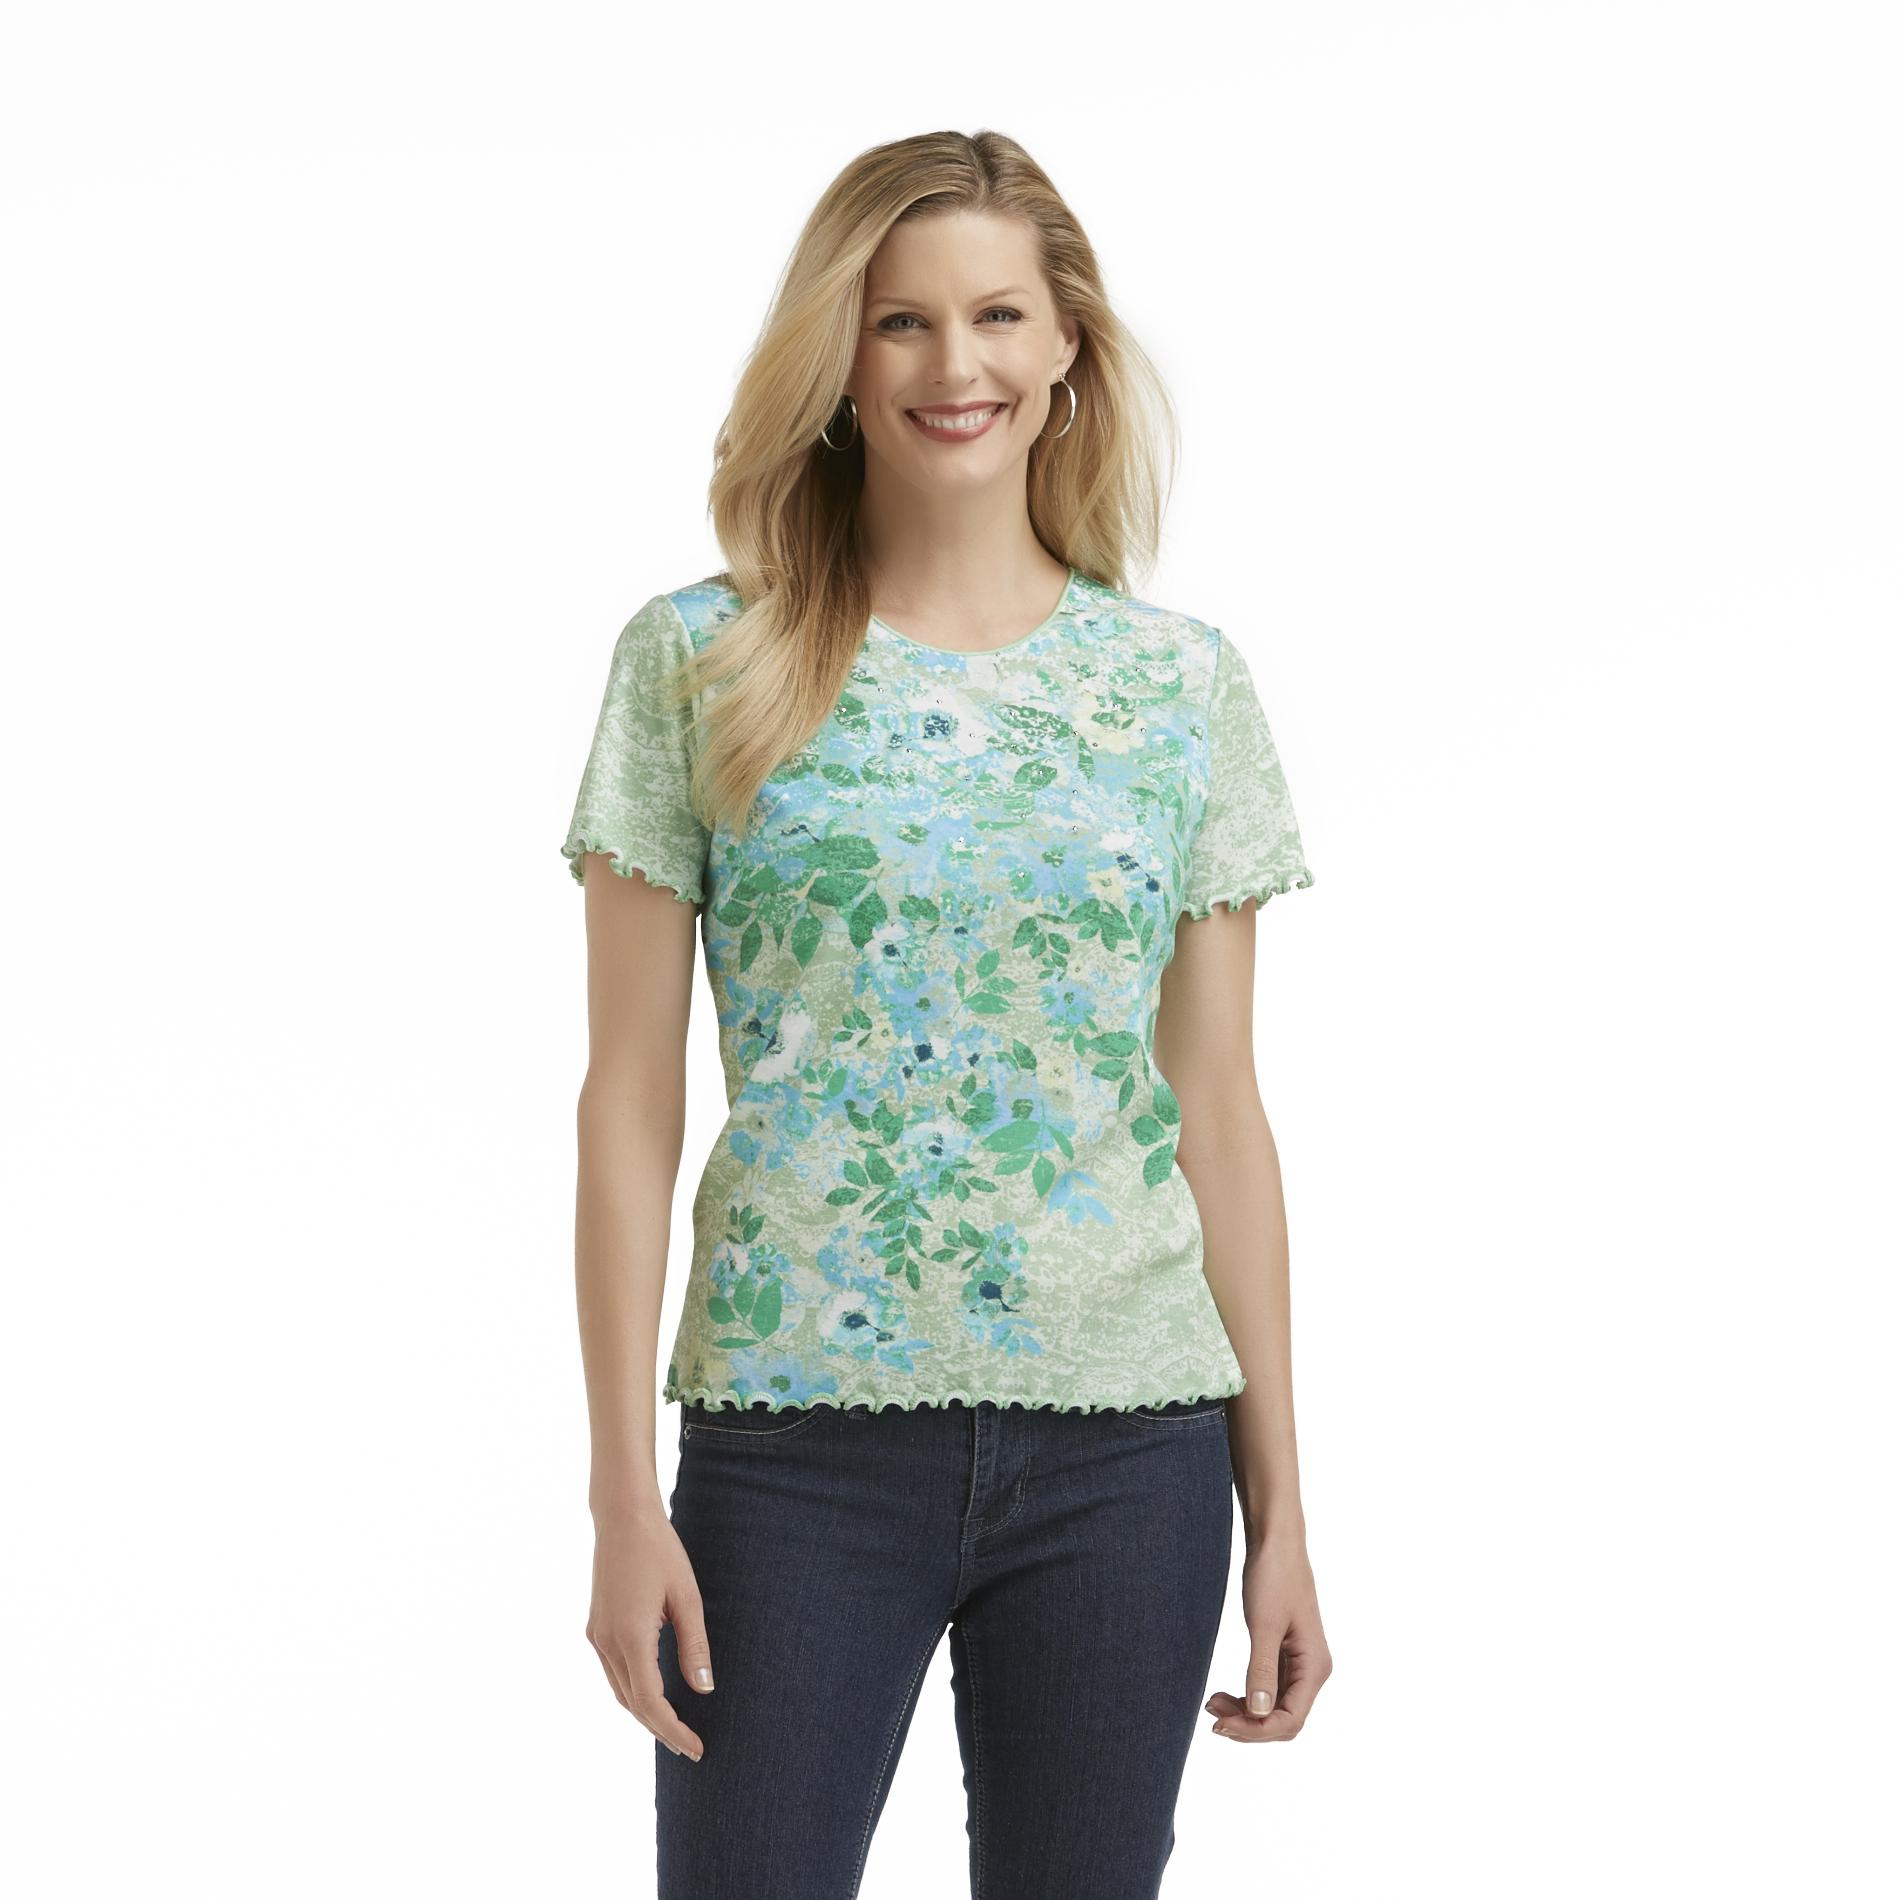 Basic Editions Women's Studded T-Shirt - Floral